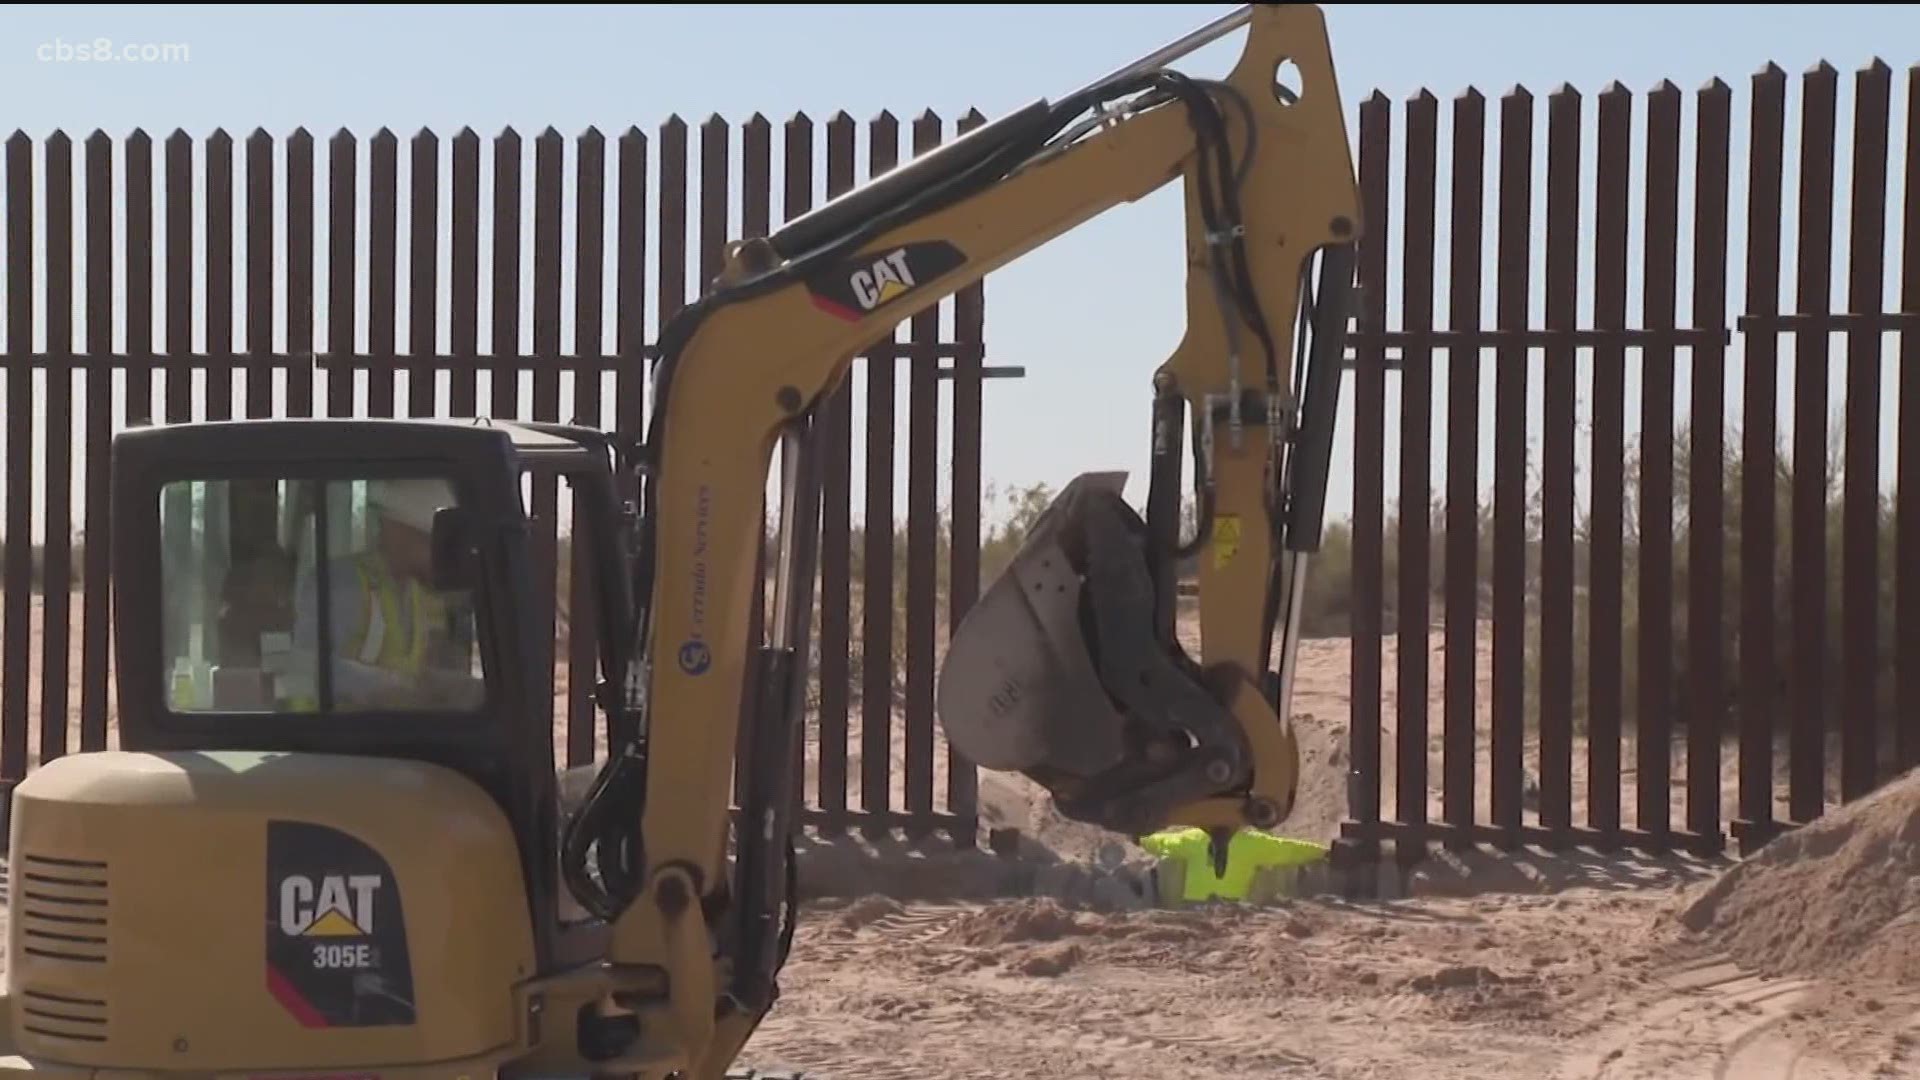 More details on the deadly crash in Imperial County, including an update on the hole in the border fence.